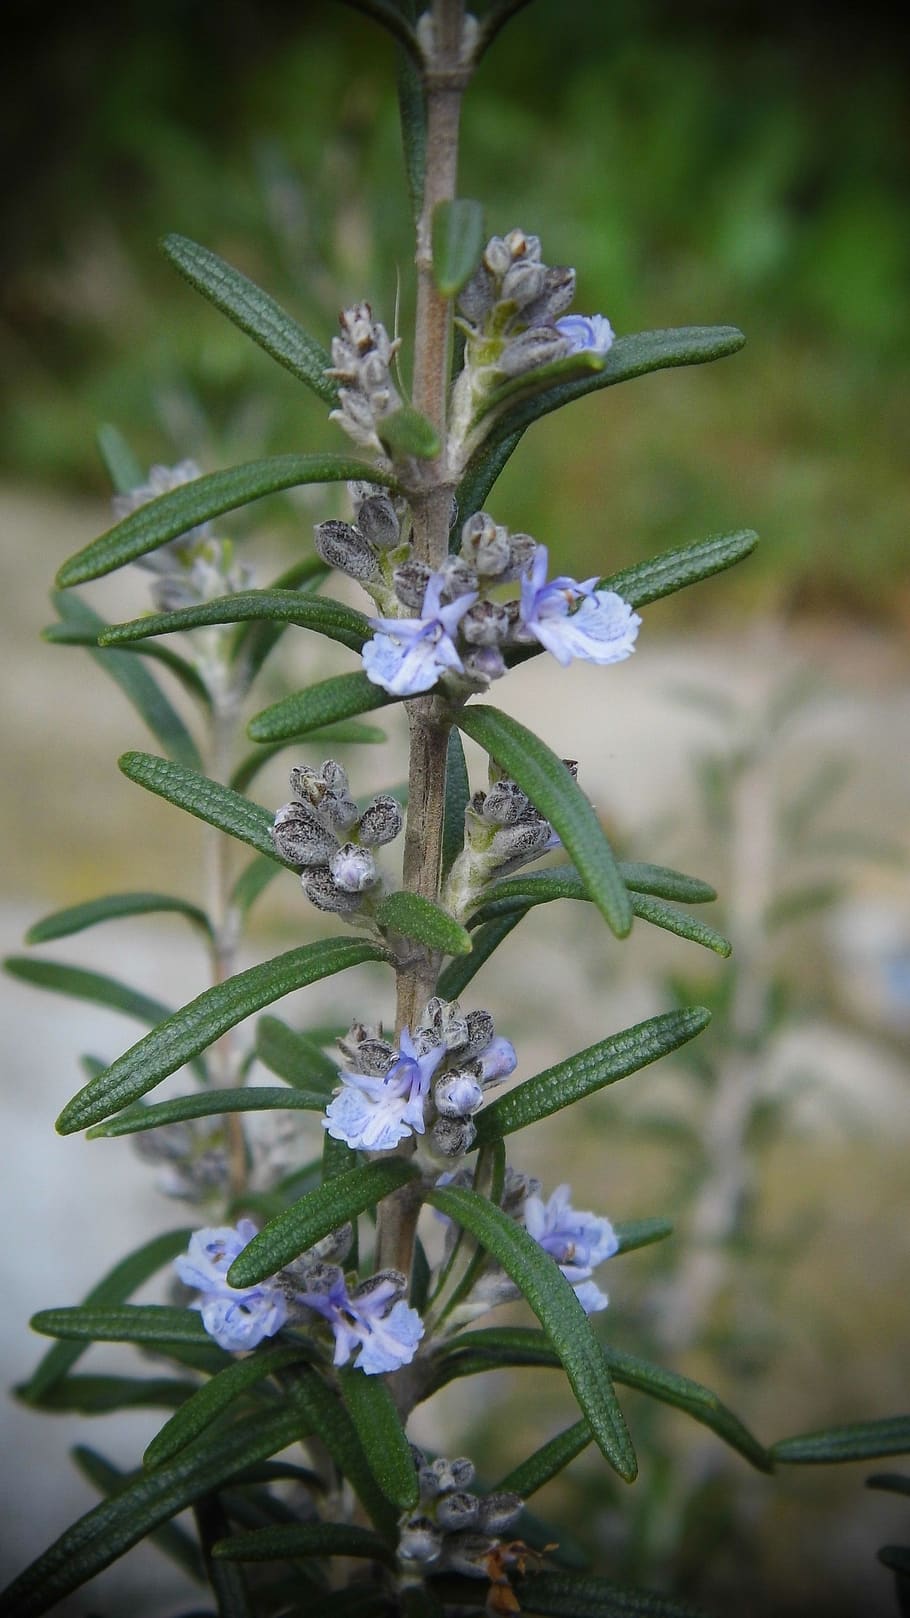 plant, rosemary, flowering plant, flower, beauty in nature, vulnerability, fragility, close-up, growth, focus on foreground